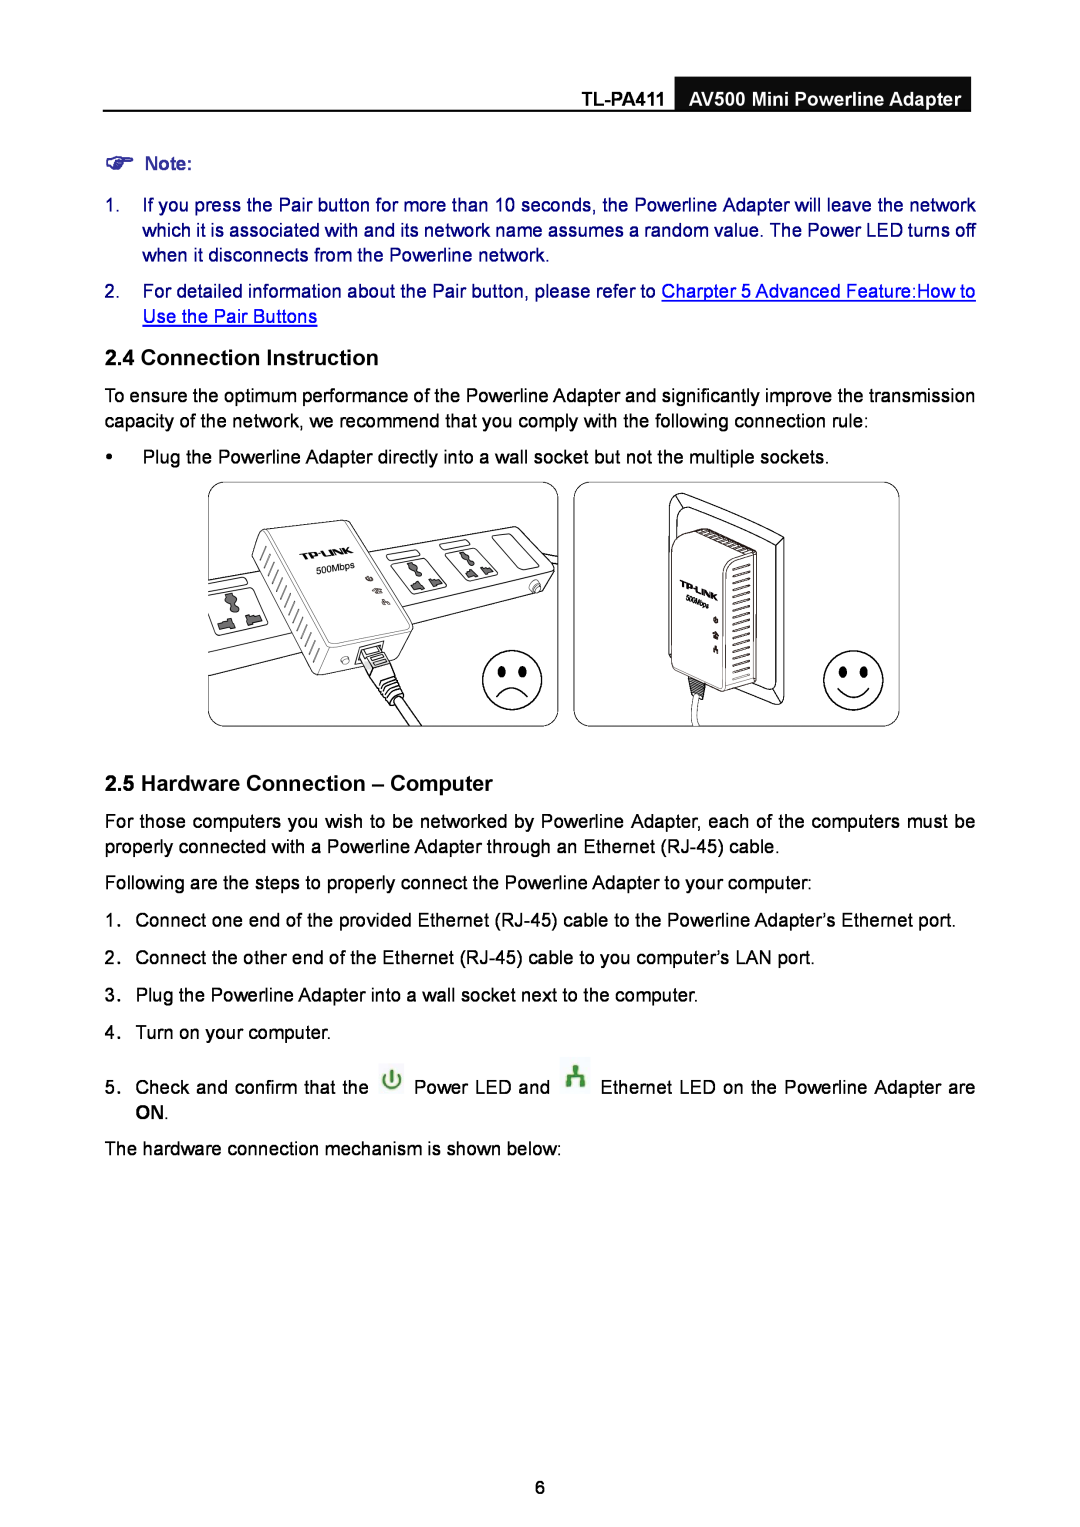 TP-Link manual Connection Instruction, Hardware Connection - Computer, TL-PA411 AV500 Mini Powerline Adapter 